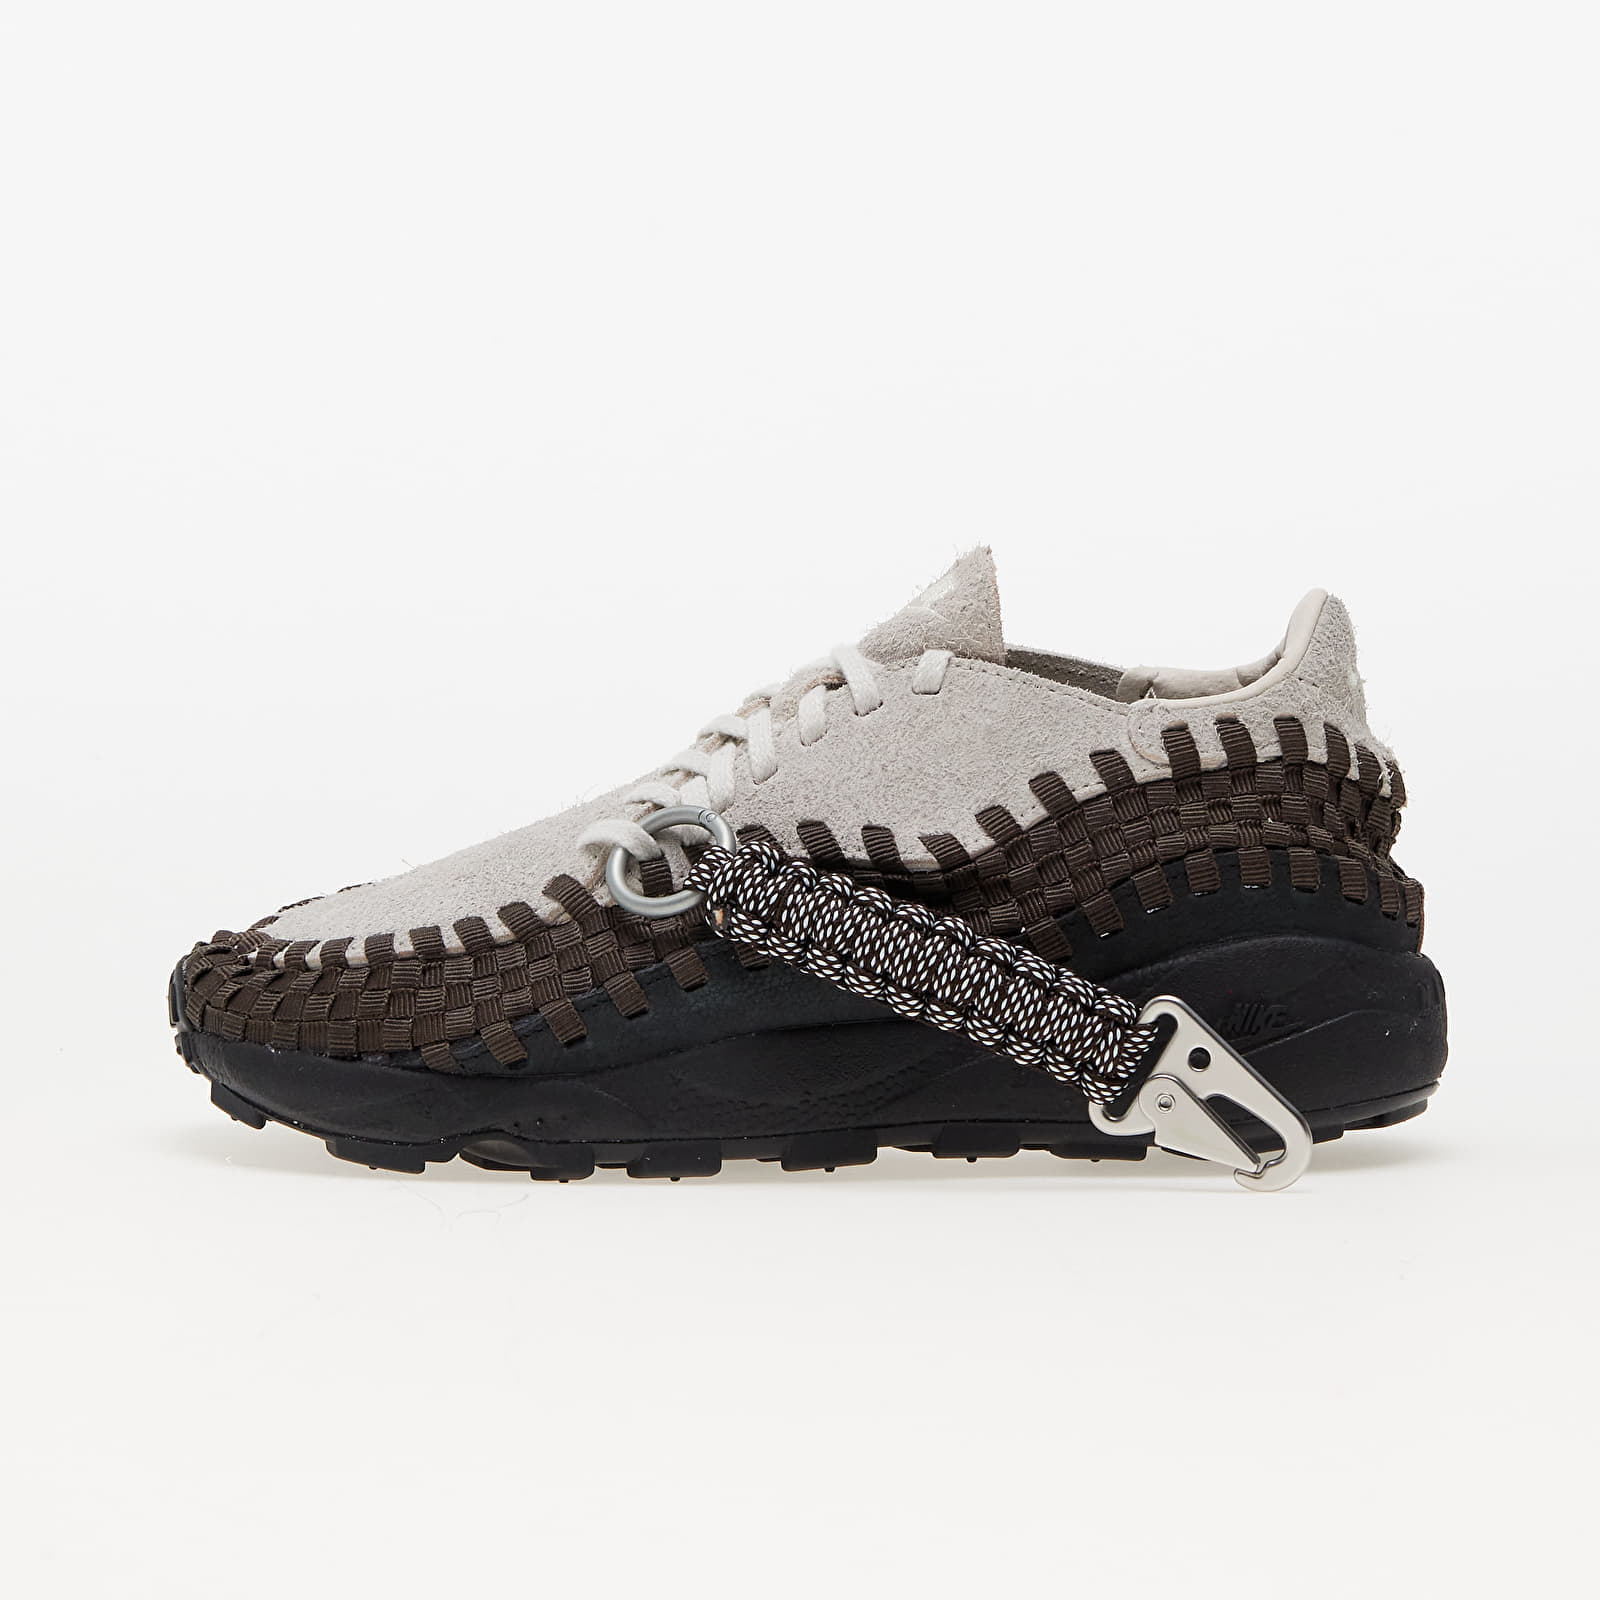 Nike - w air footscape woven light orewood brown/ coconut milk